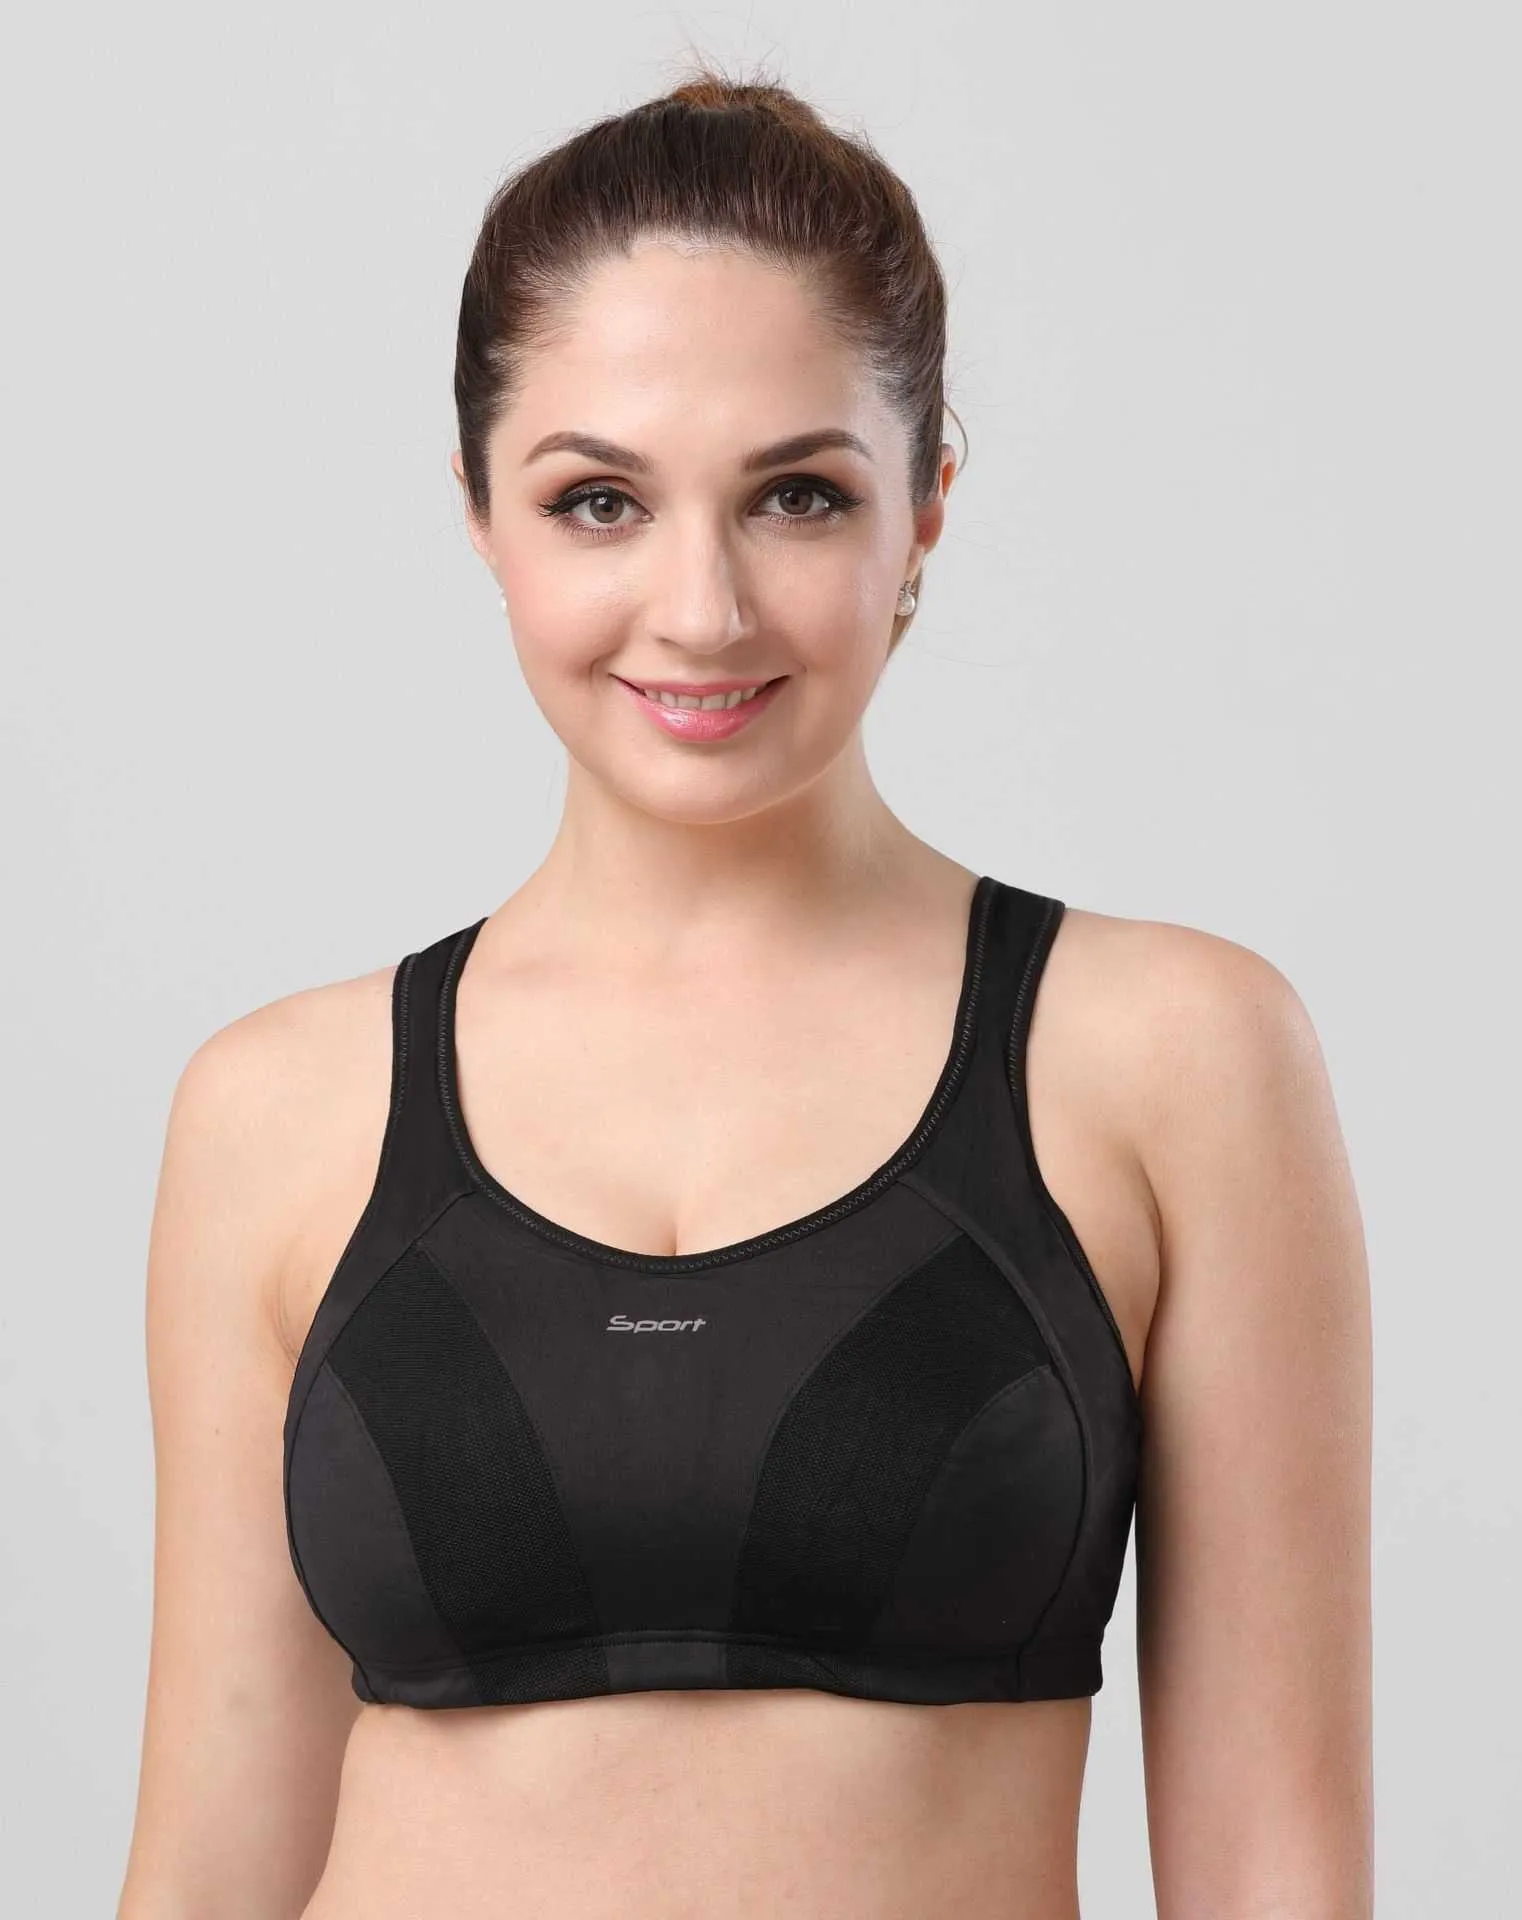 Seamless Shockproof Brooks Rebound Racer Bra For Women Large Size, Thin  Cup, No Steel Ring BCDEFG Drop 210623 From Dou01, $6.73